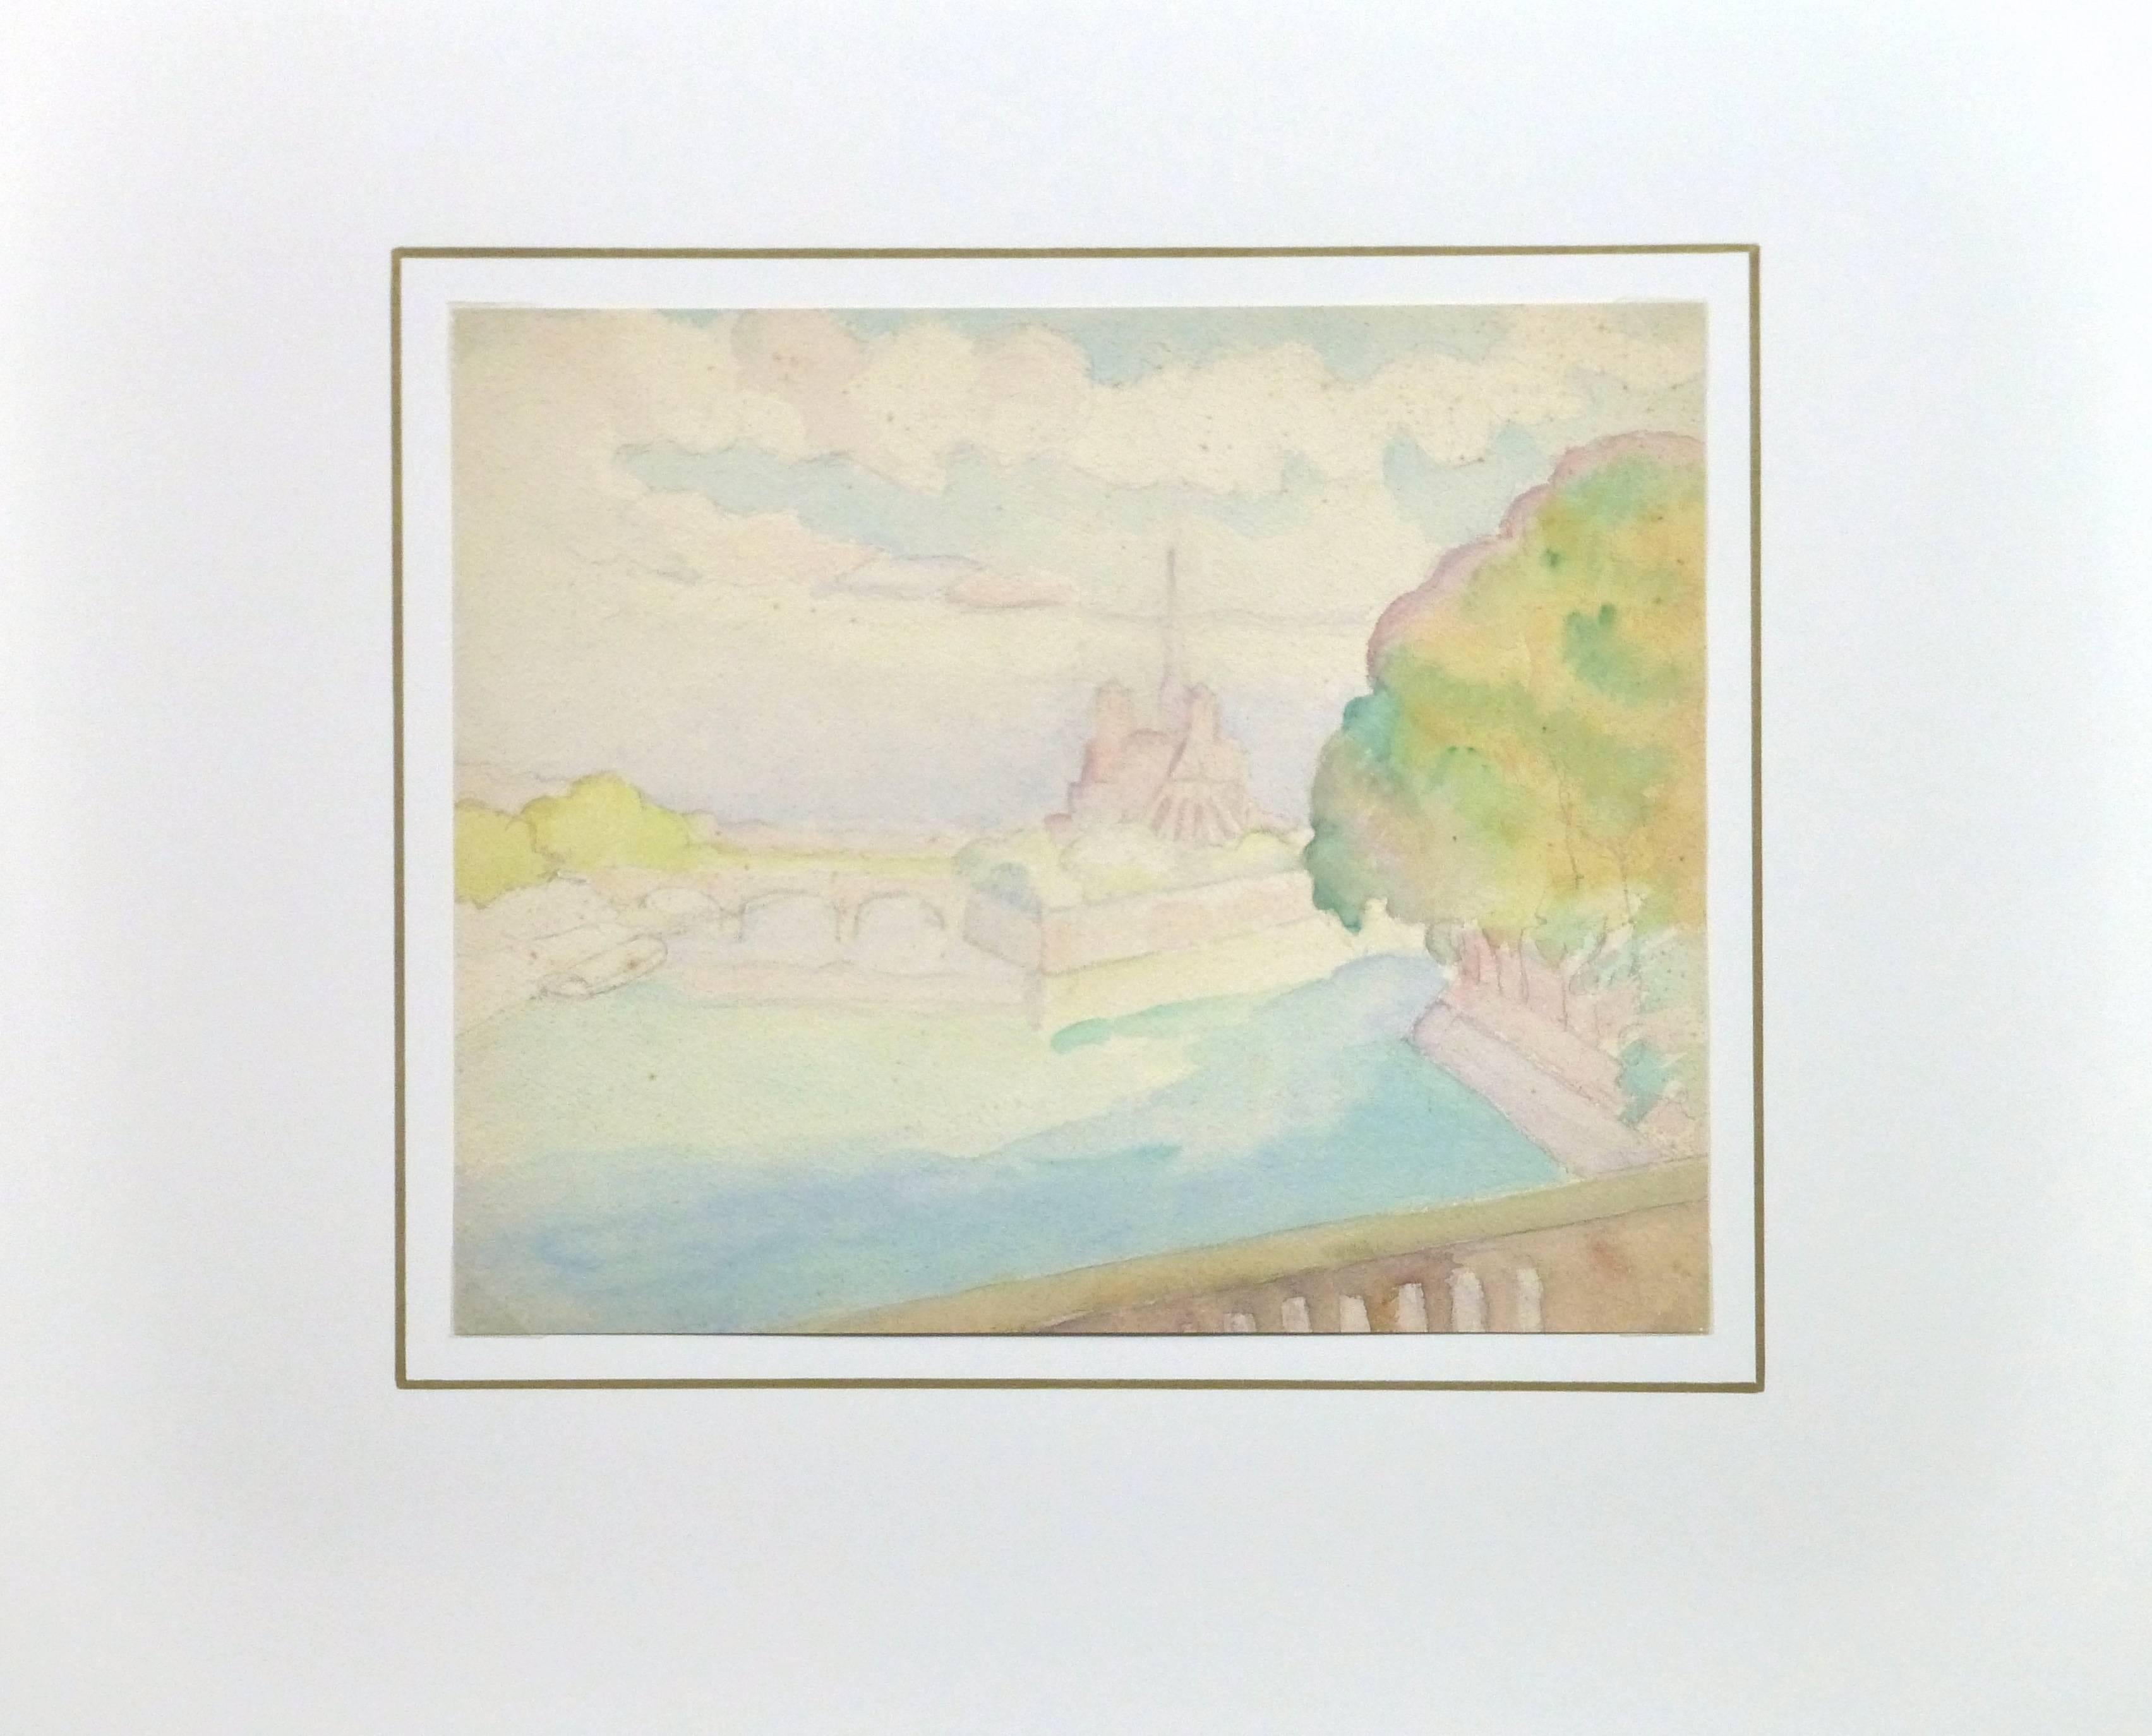 Ethereal watercolor landscape painting of a pastel hued view of the river Seine in Paris with l'Ile de la Cité and Notre Dame cathedral, circa 1930. Artist unknown.

Original artwork on paper displayed on a white mat with a gold border. Archival